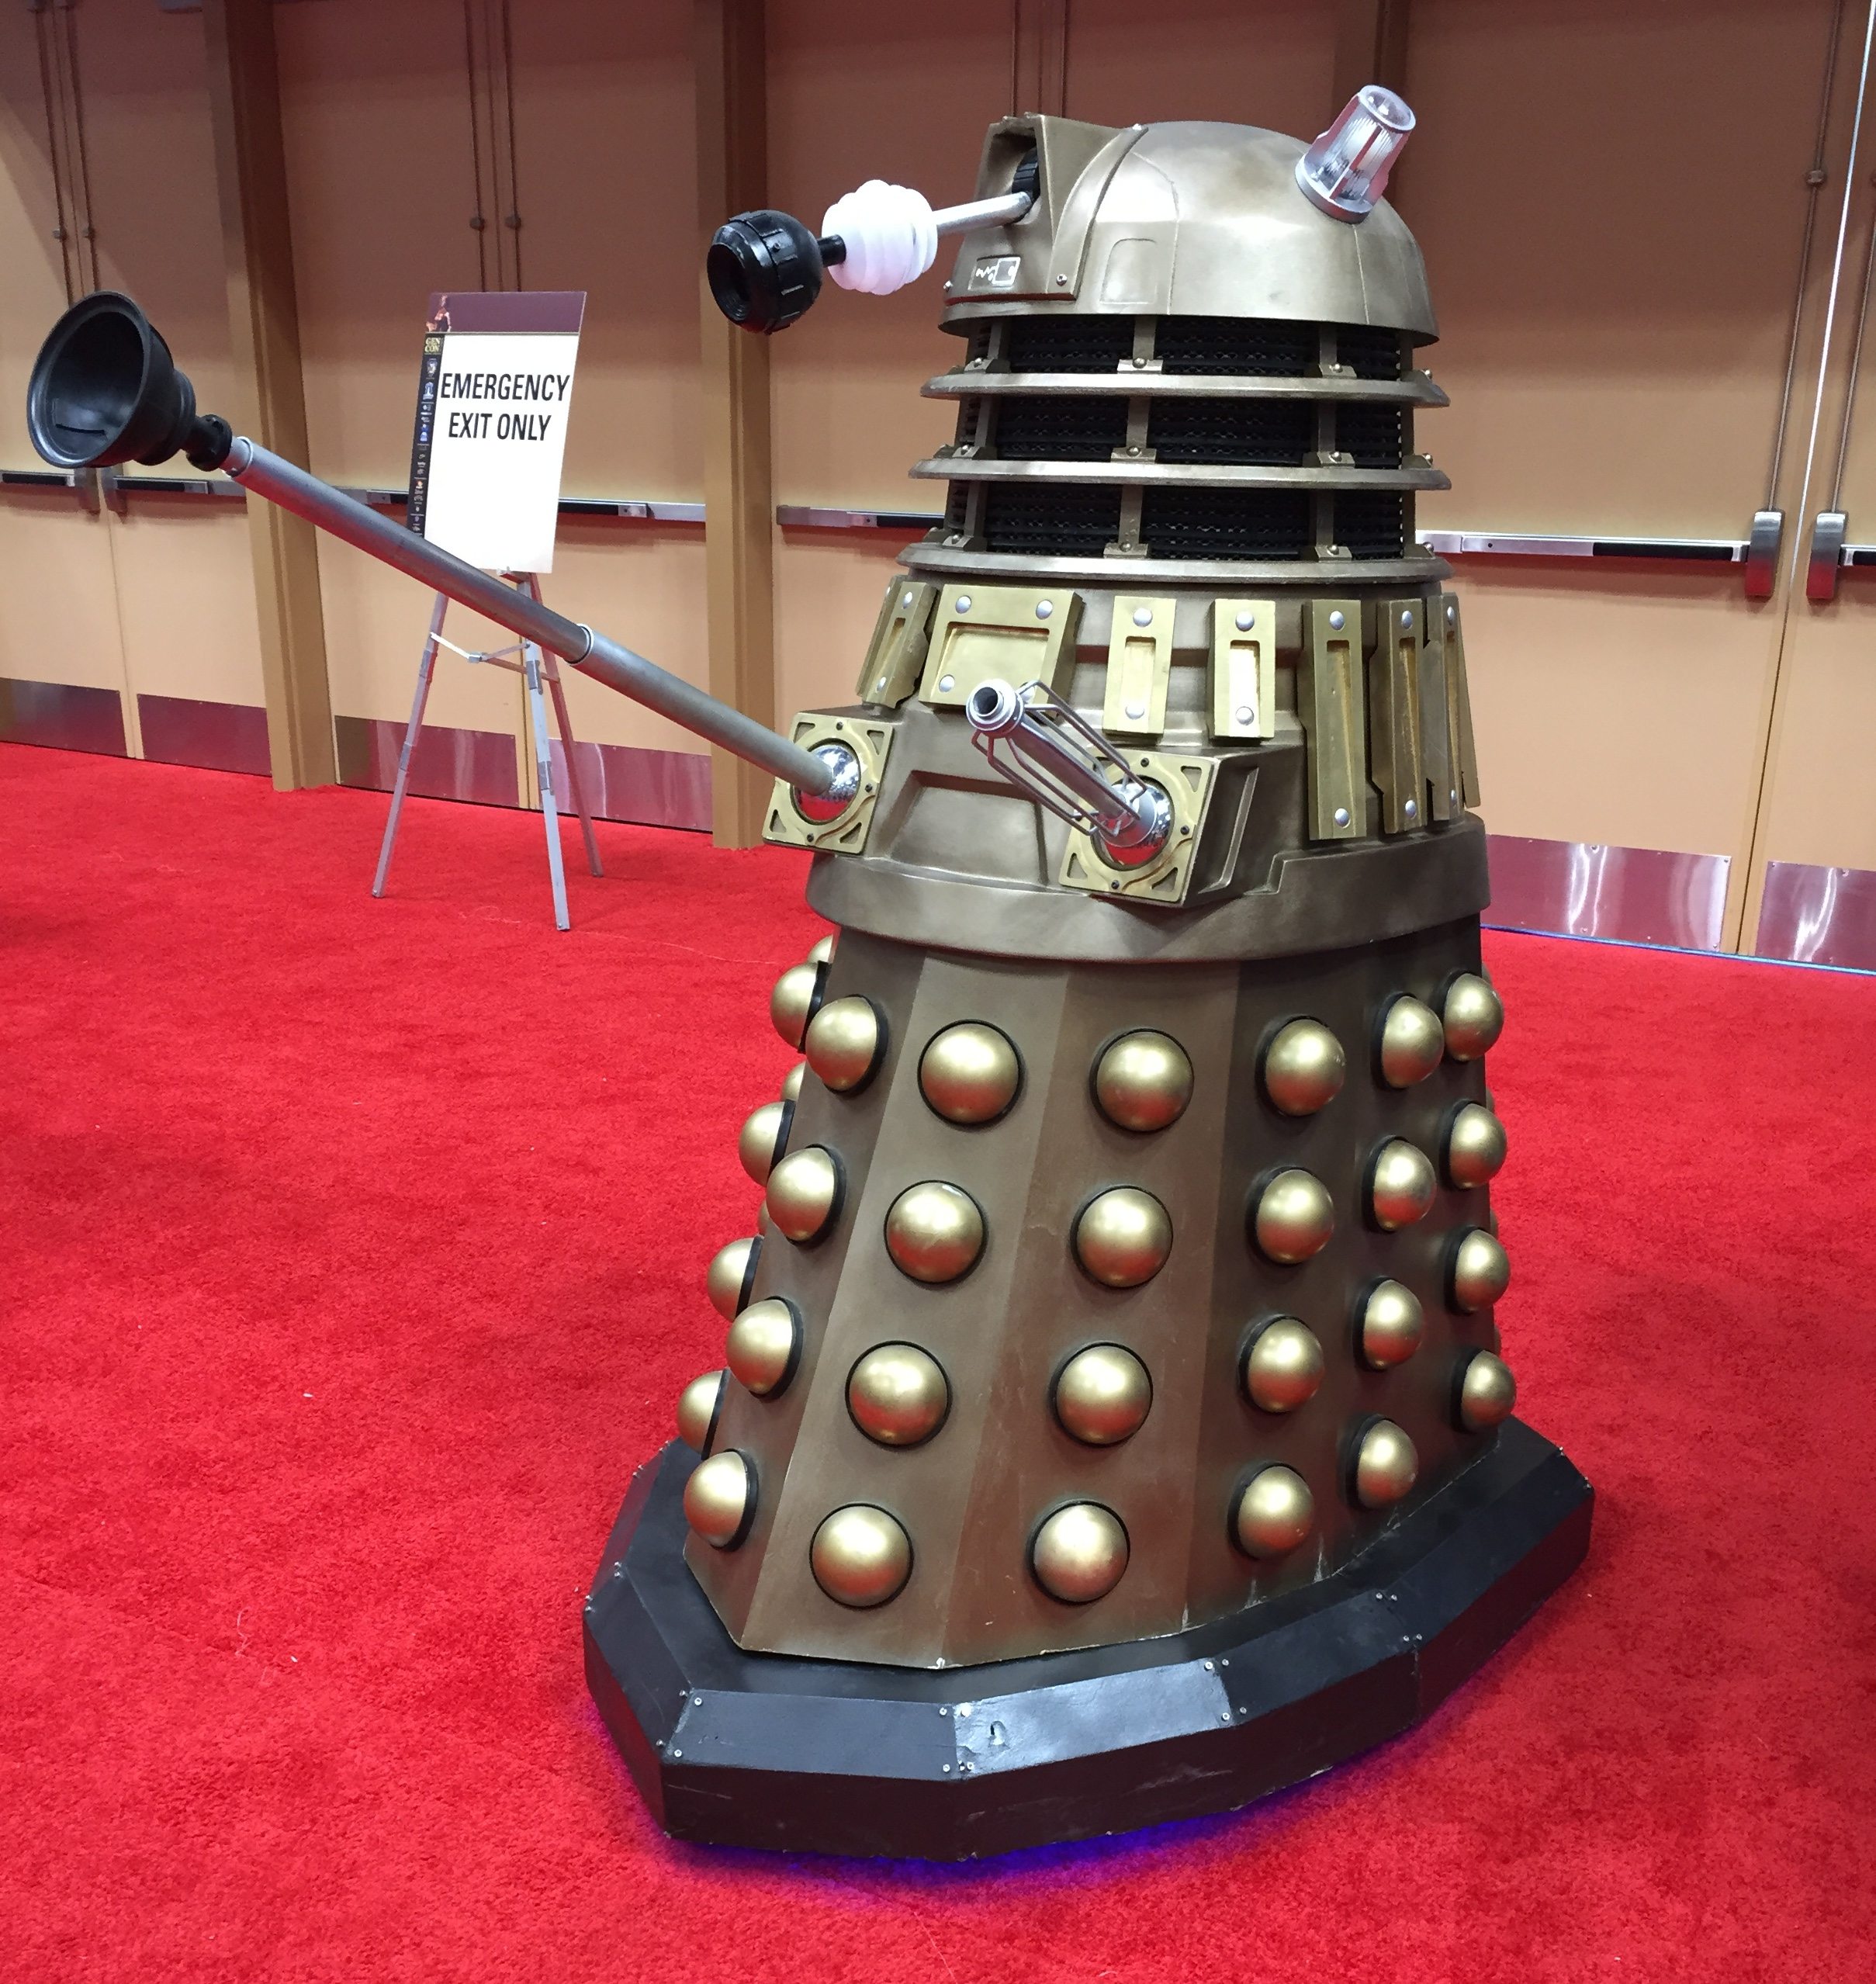 The Dalek at the Dr. Who merchandise booth is a staple of GenCon